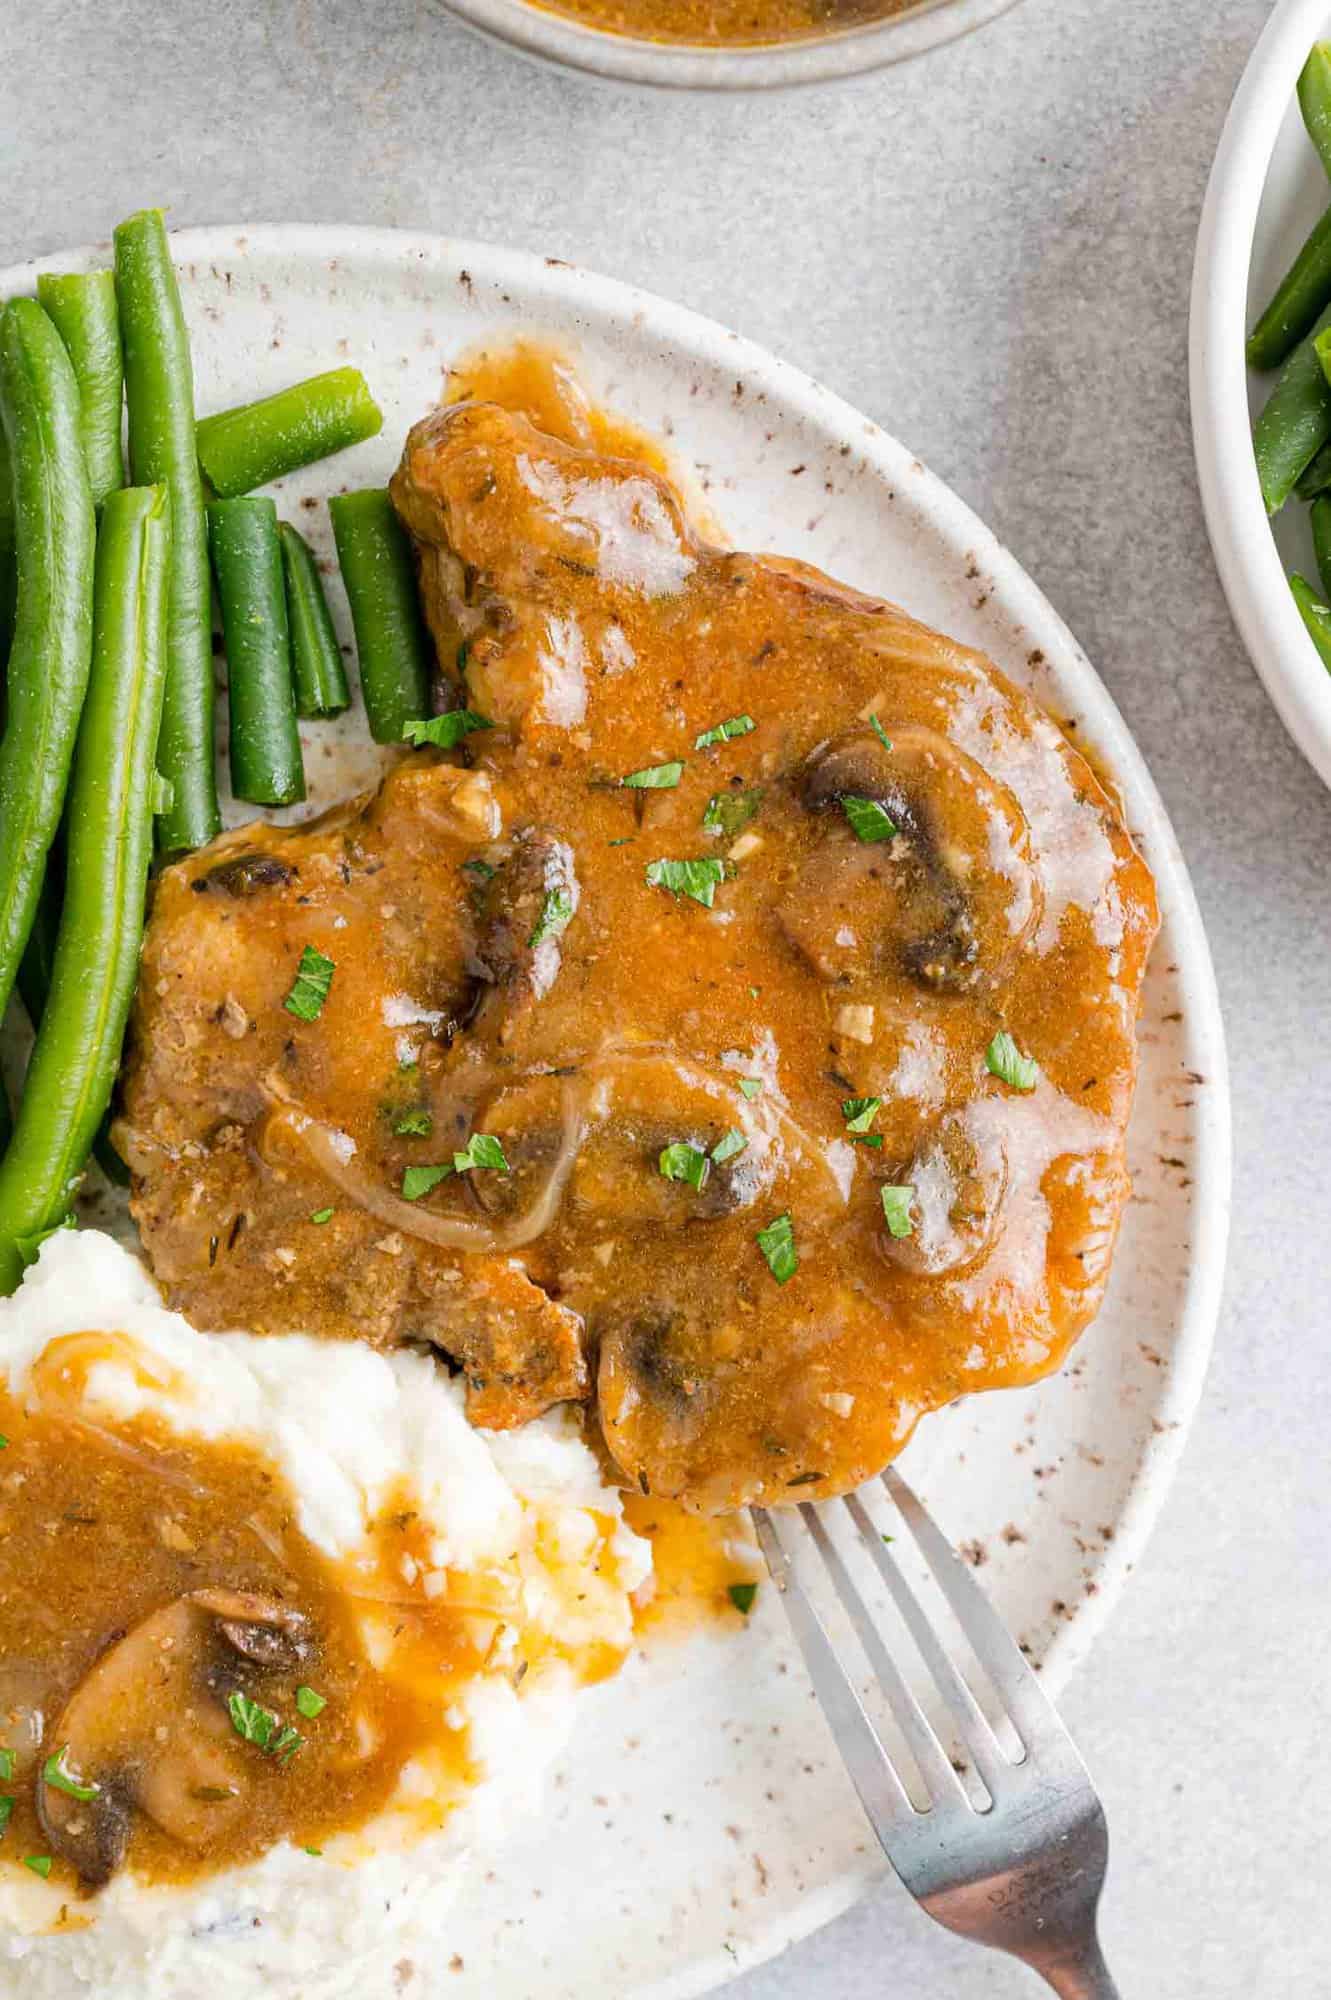 Overhead view of slow cooker pork chops served on a plate, covered in gravy next to mashed potatoes and green beans.